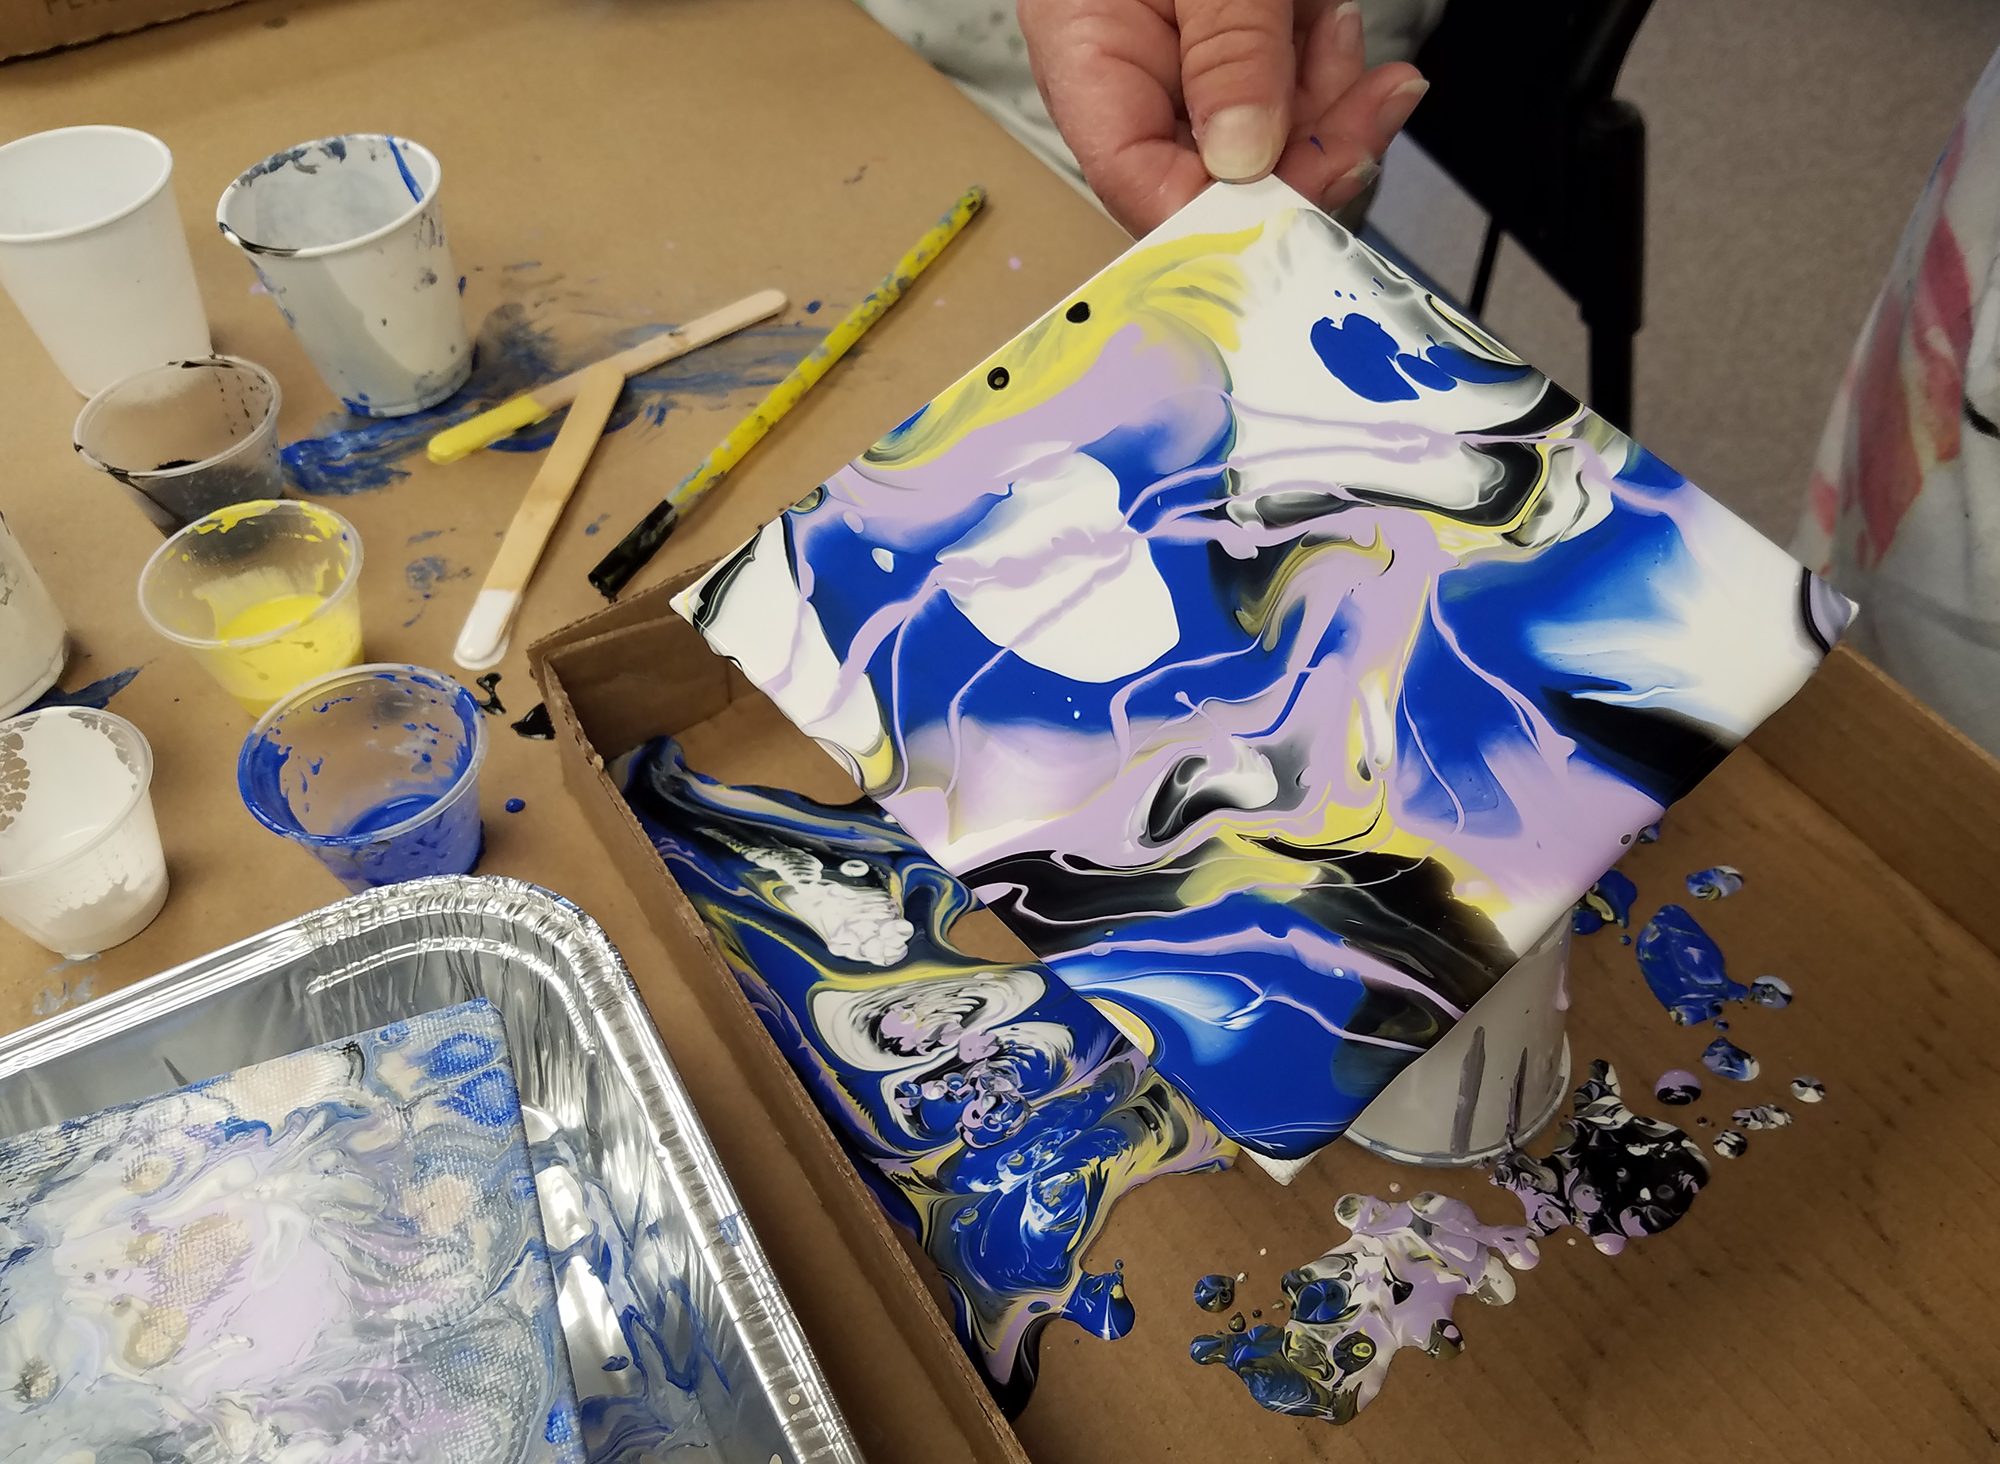 Hand holding a pour painting in progress with areas of blue, purple, yellow, and white paint mixing together. In the background are paint cups and supplies.